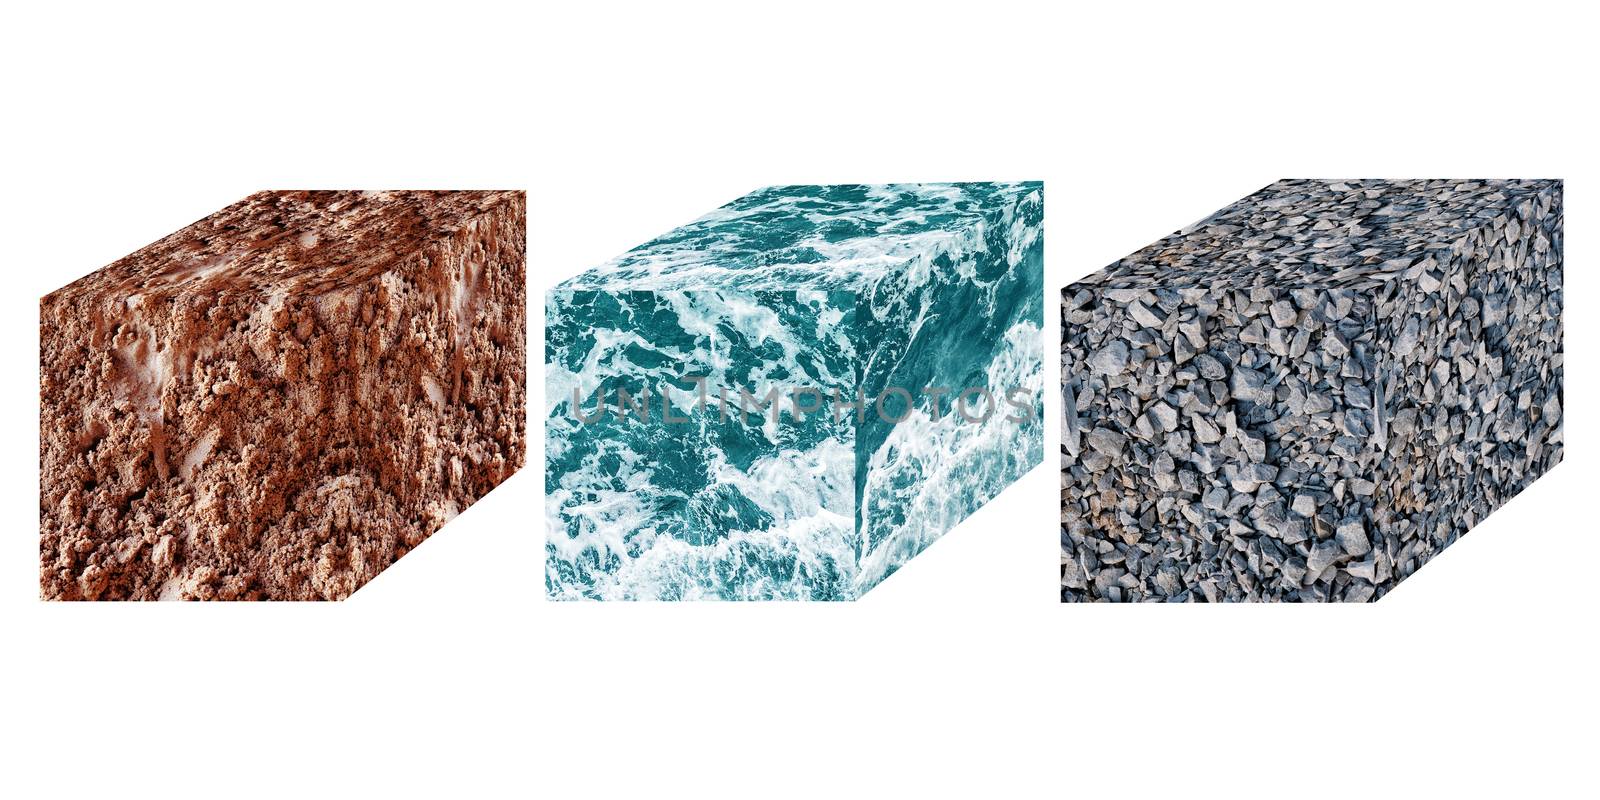 elements of nature : earth, water,rock detail and close up